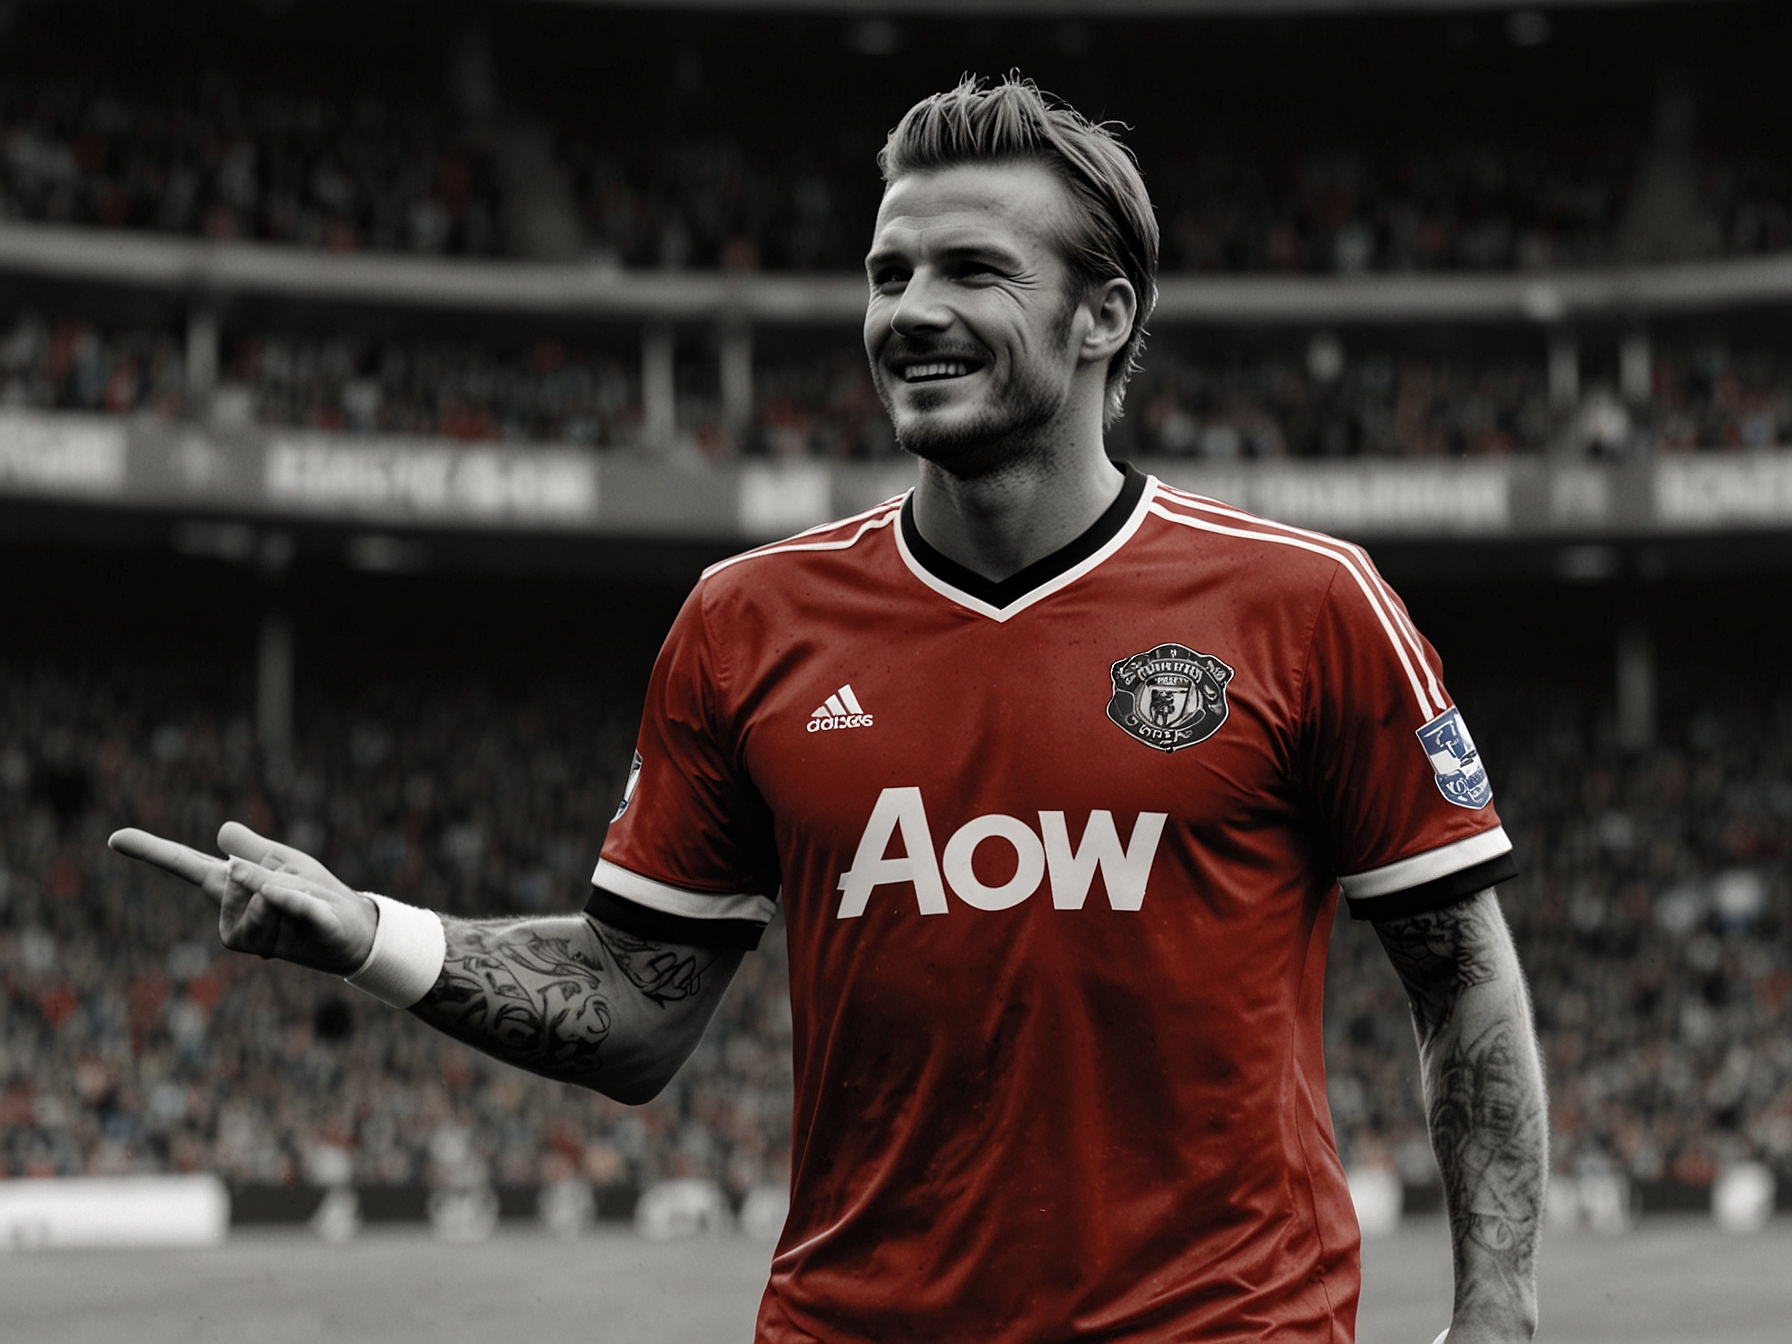 David Beckham in a Manchester United jersey, celebrating a goal at Old Trafford.